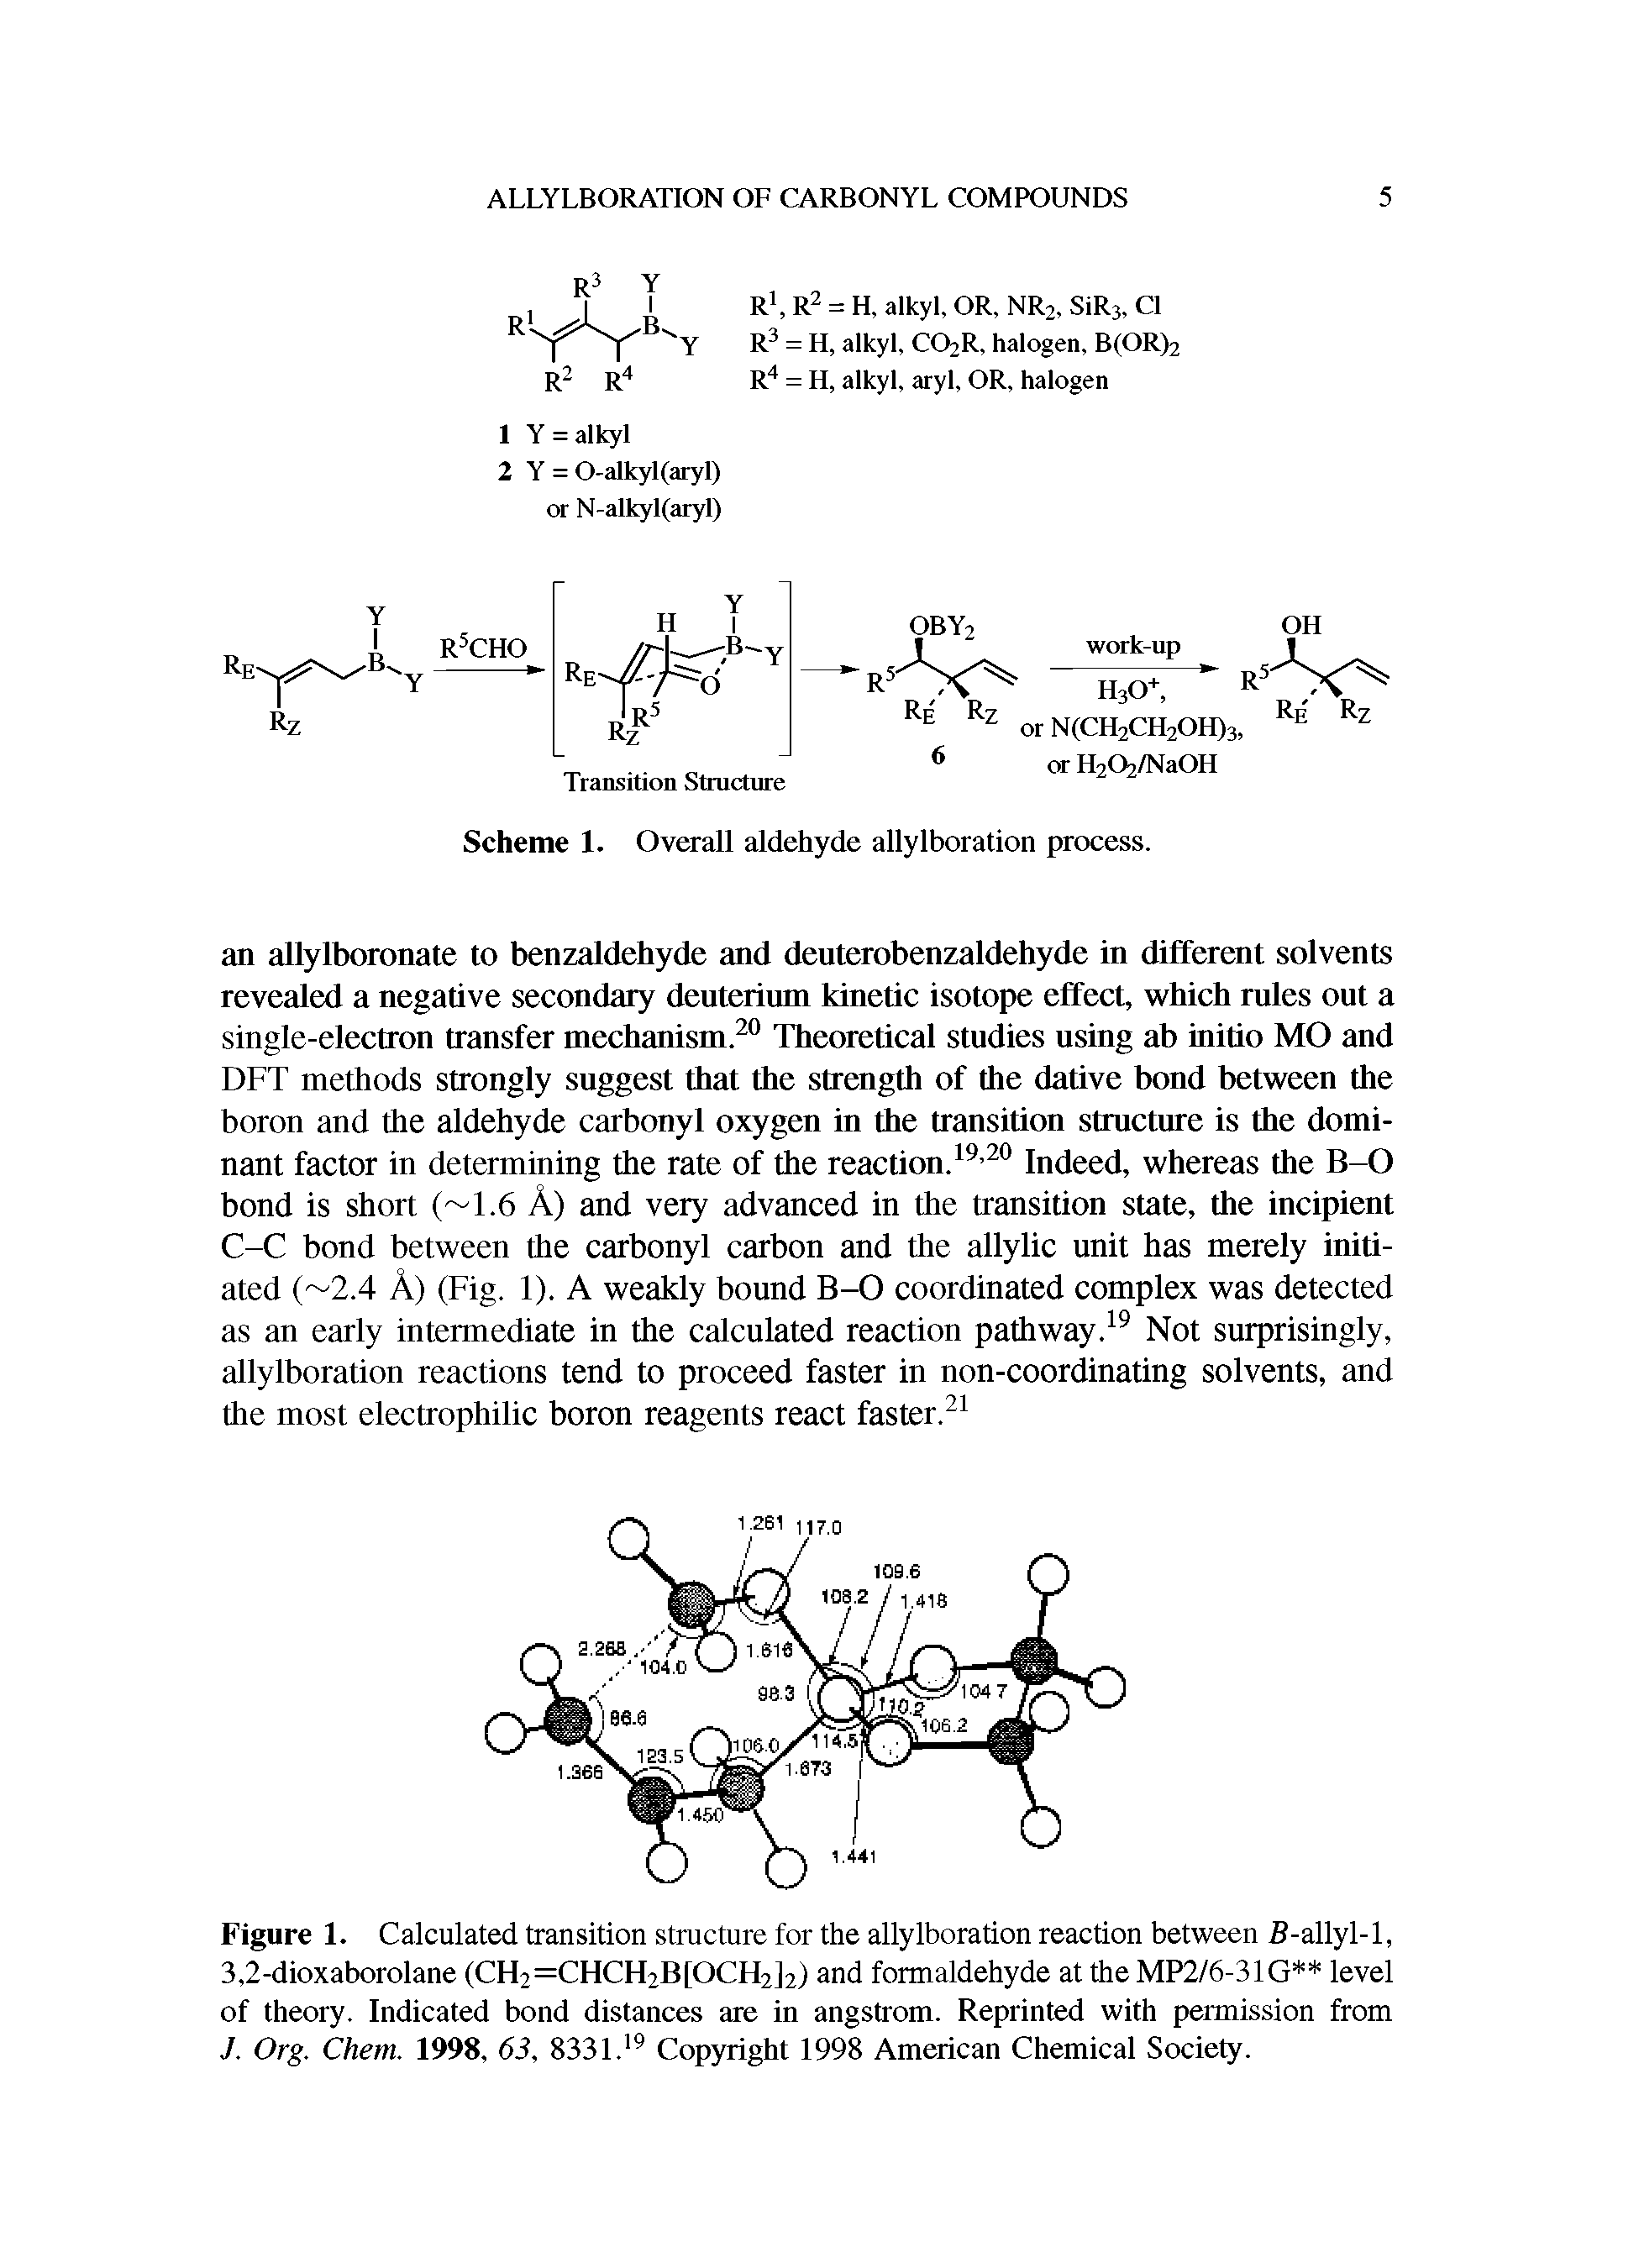 Figure 1. Calculated transition structure for the allylboration reaction between 5-allyl-l, 3,2-dioxaborolane (CH2=CHCH2B[OCH2]2) and formaldehyde at the MP2/6-31G level of theory. Indicated bond distances are in angstrom. Reprinted with permission from J. Org. Chem. 1998, 63, 8331. Copyright 1998 American Chemical Society.